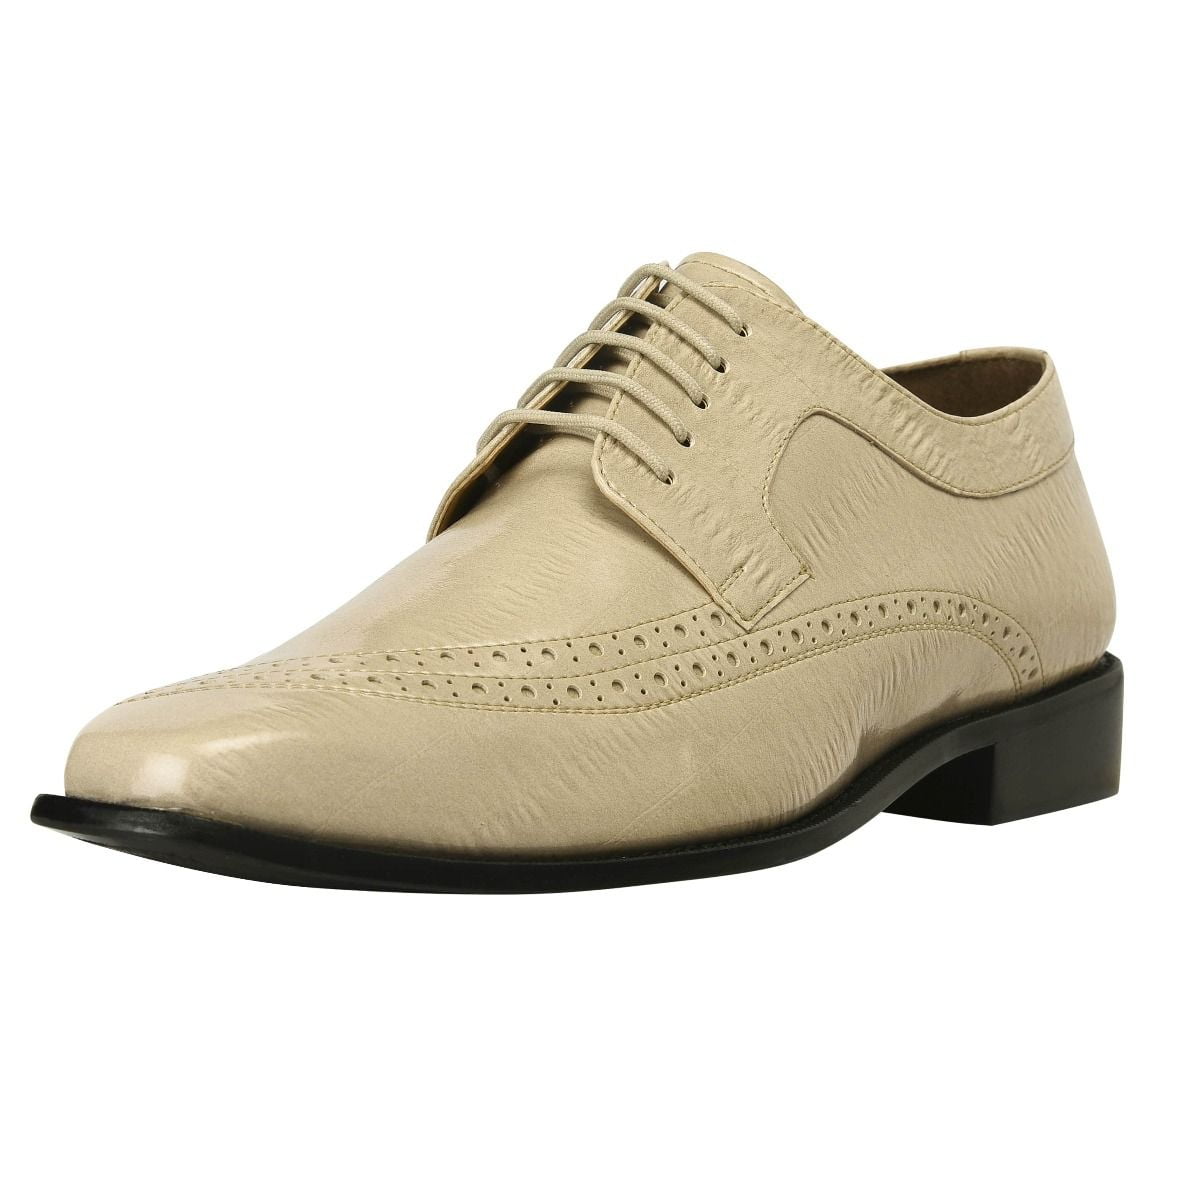 Camden Details about   LibertyZeno Men's EEL Print Manmade Leather Lace Up Closure Dress Shoes 